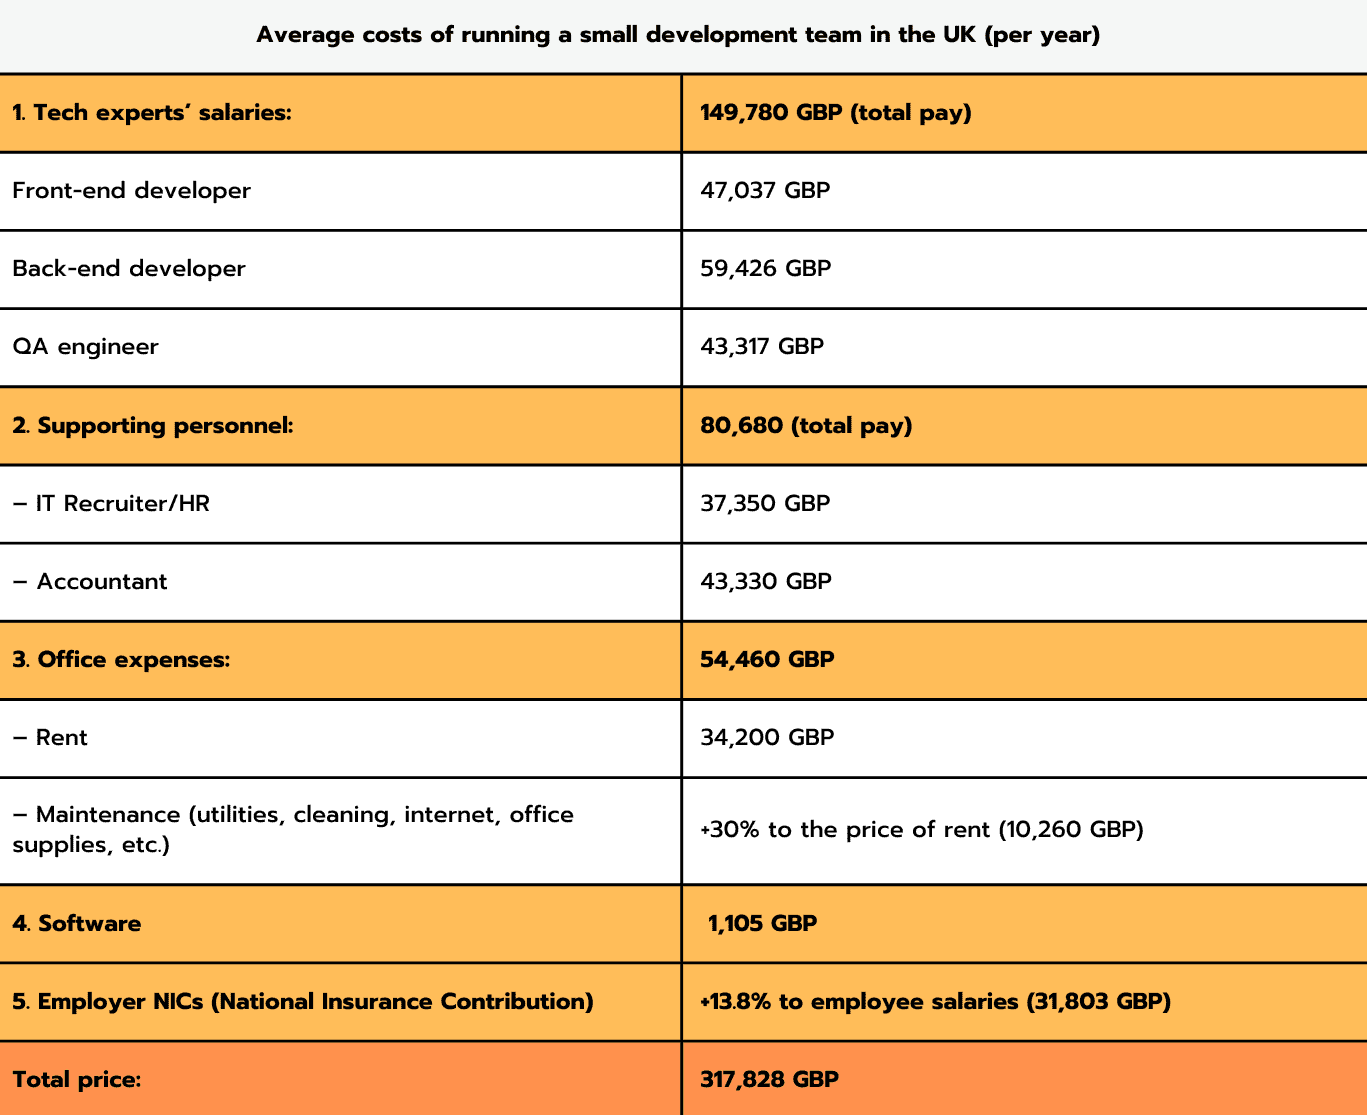 Average costs of running a small development team in the UK (per year)